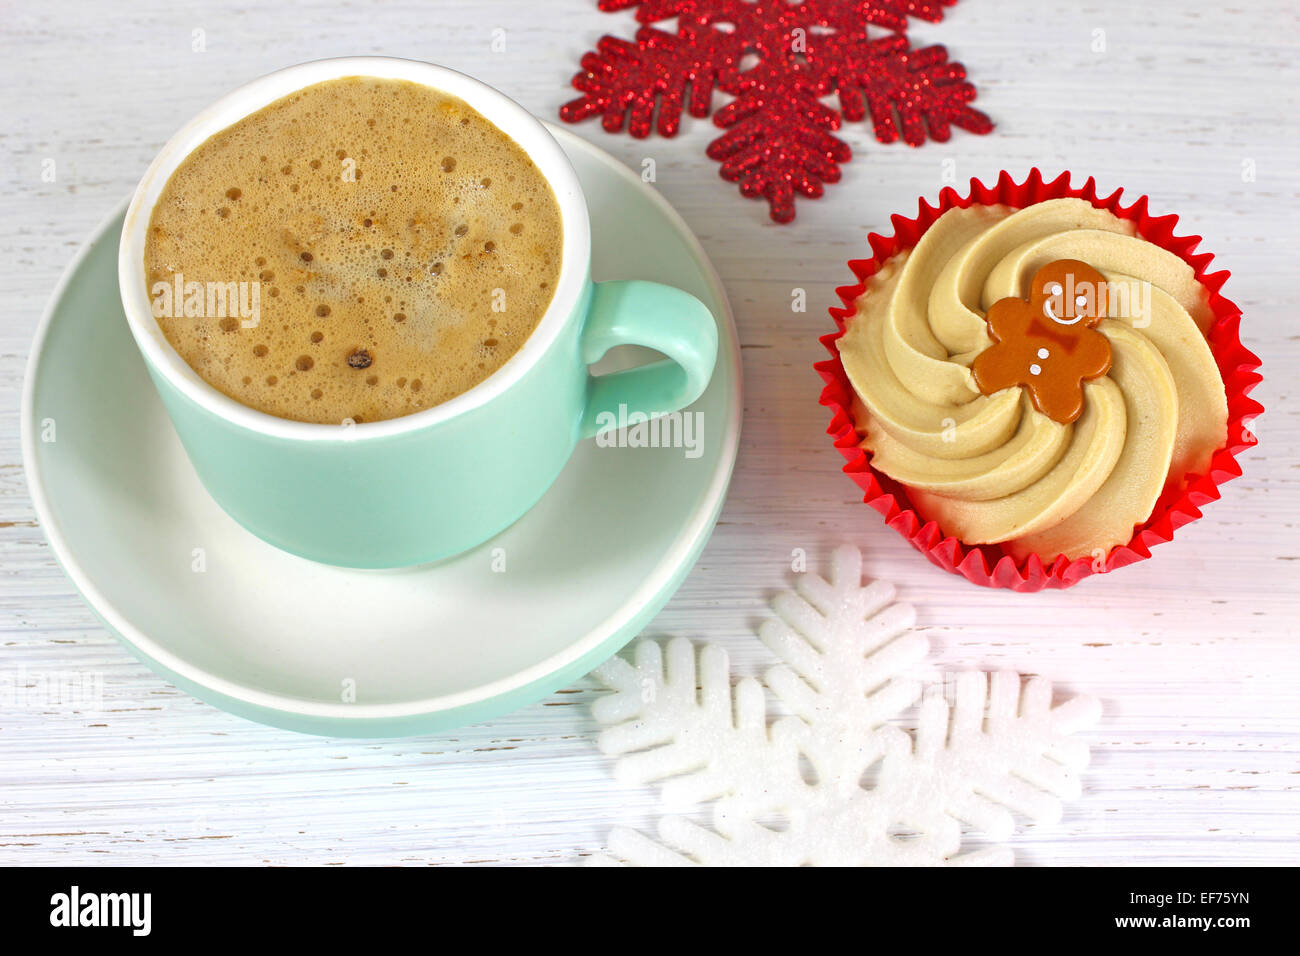 Holiday Coffee and cupcake on a rustic white wood background with glittering snowflake decorations. Stock Photo